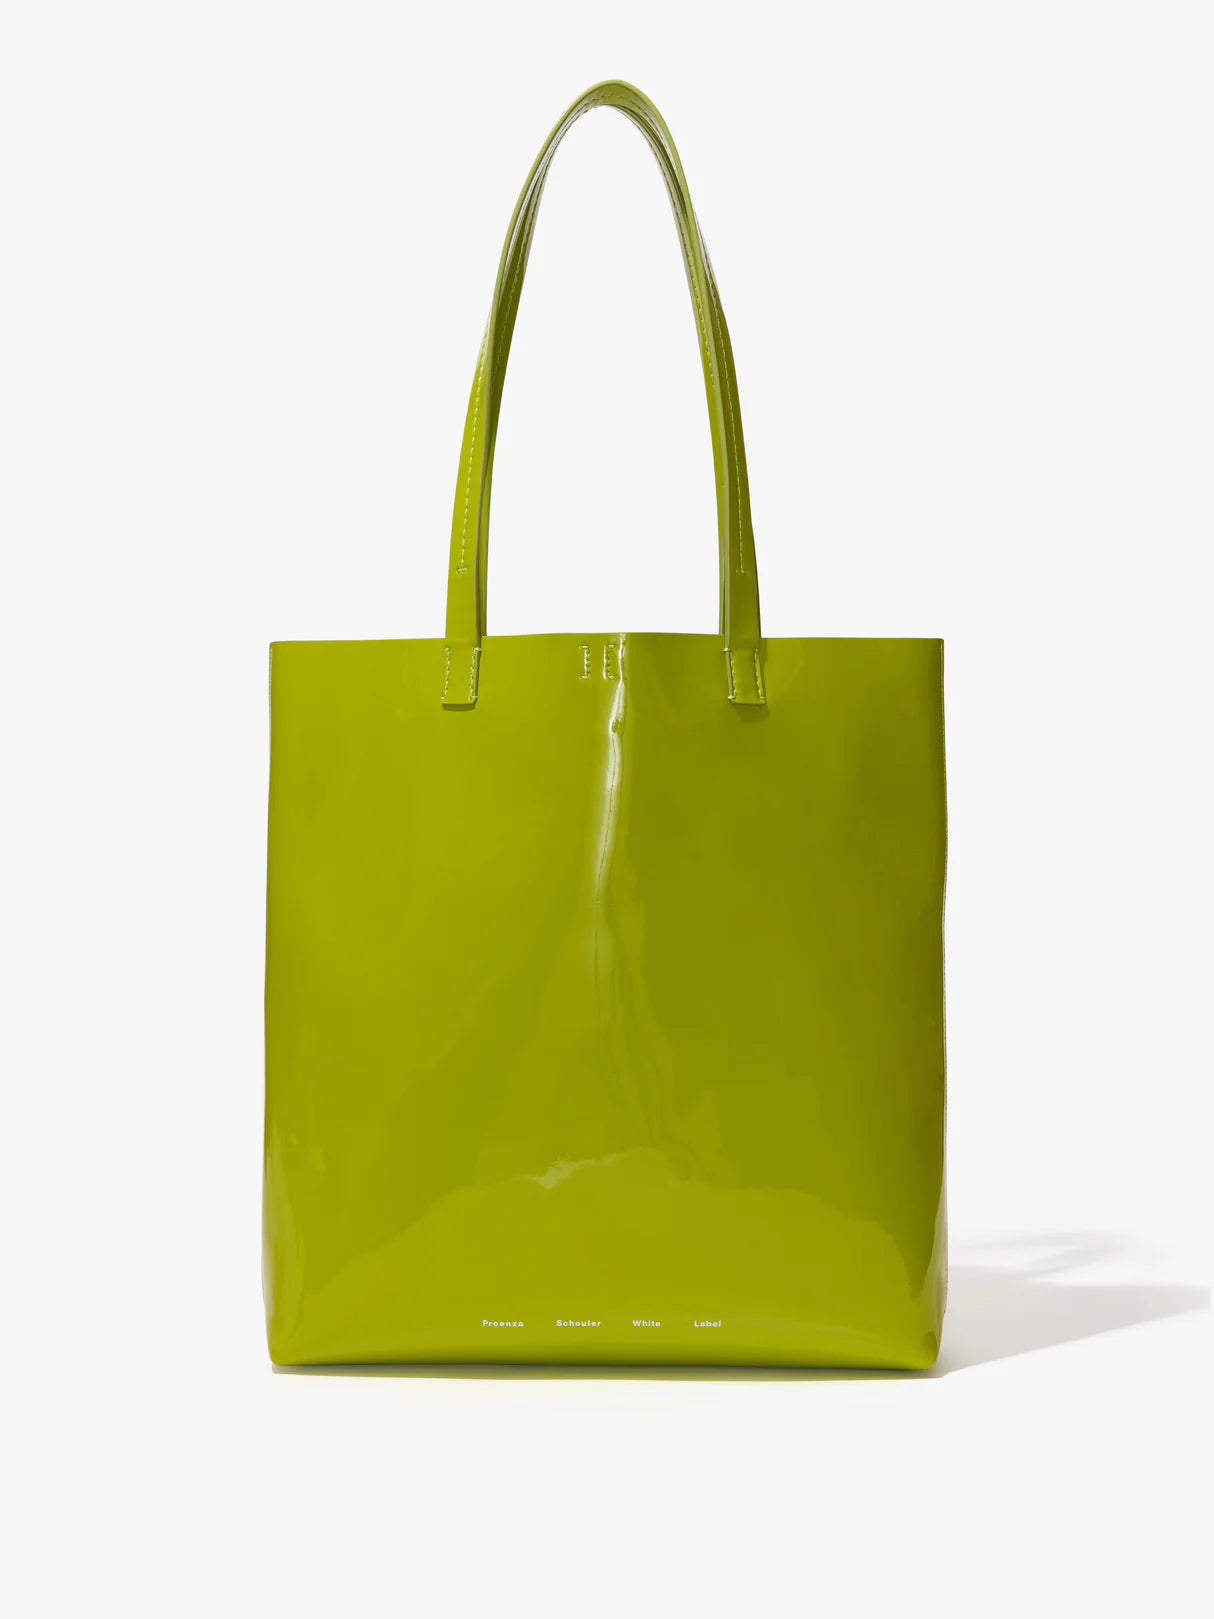 Walker Tote in Patent Leather - Chartreuse